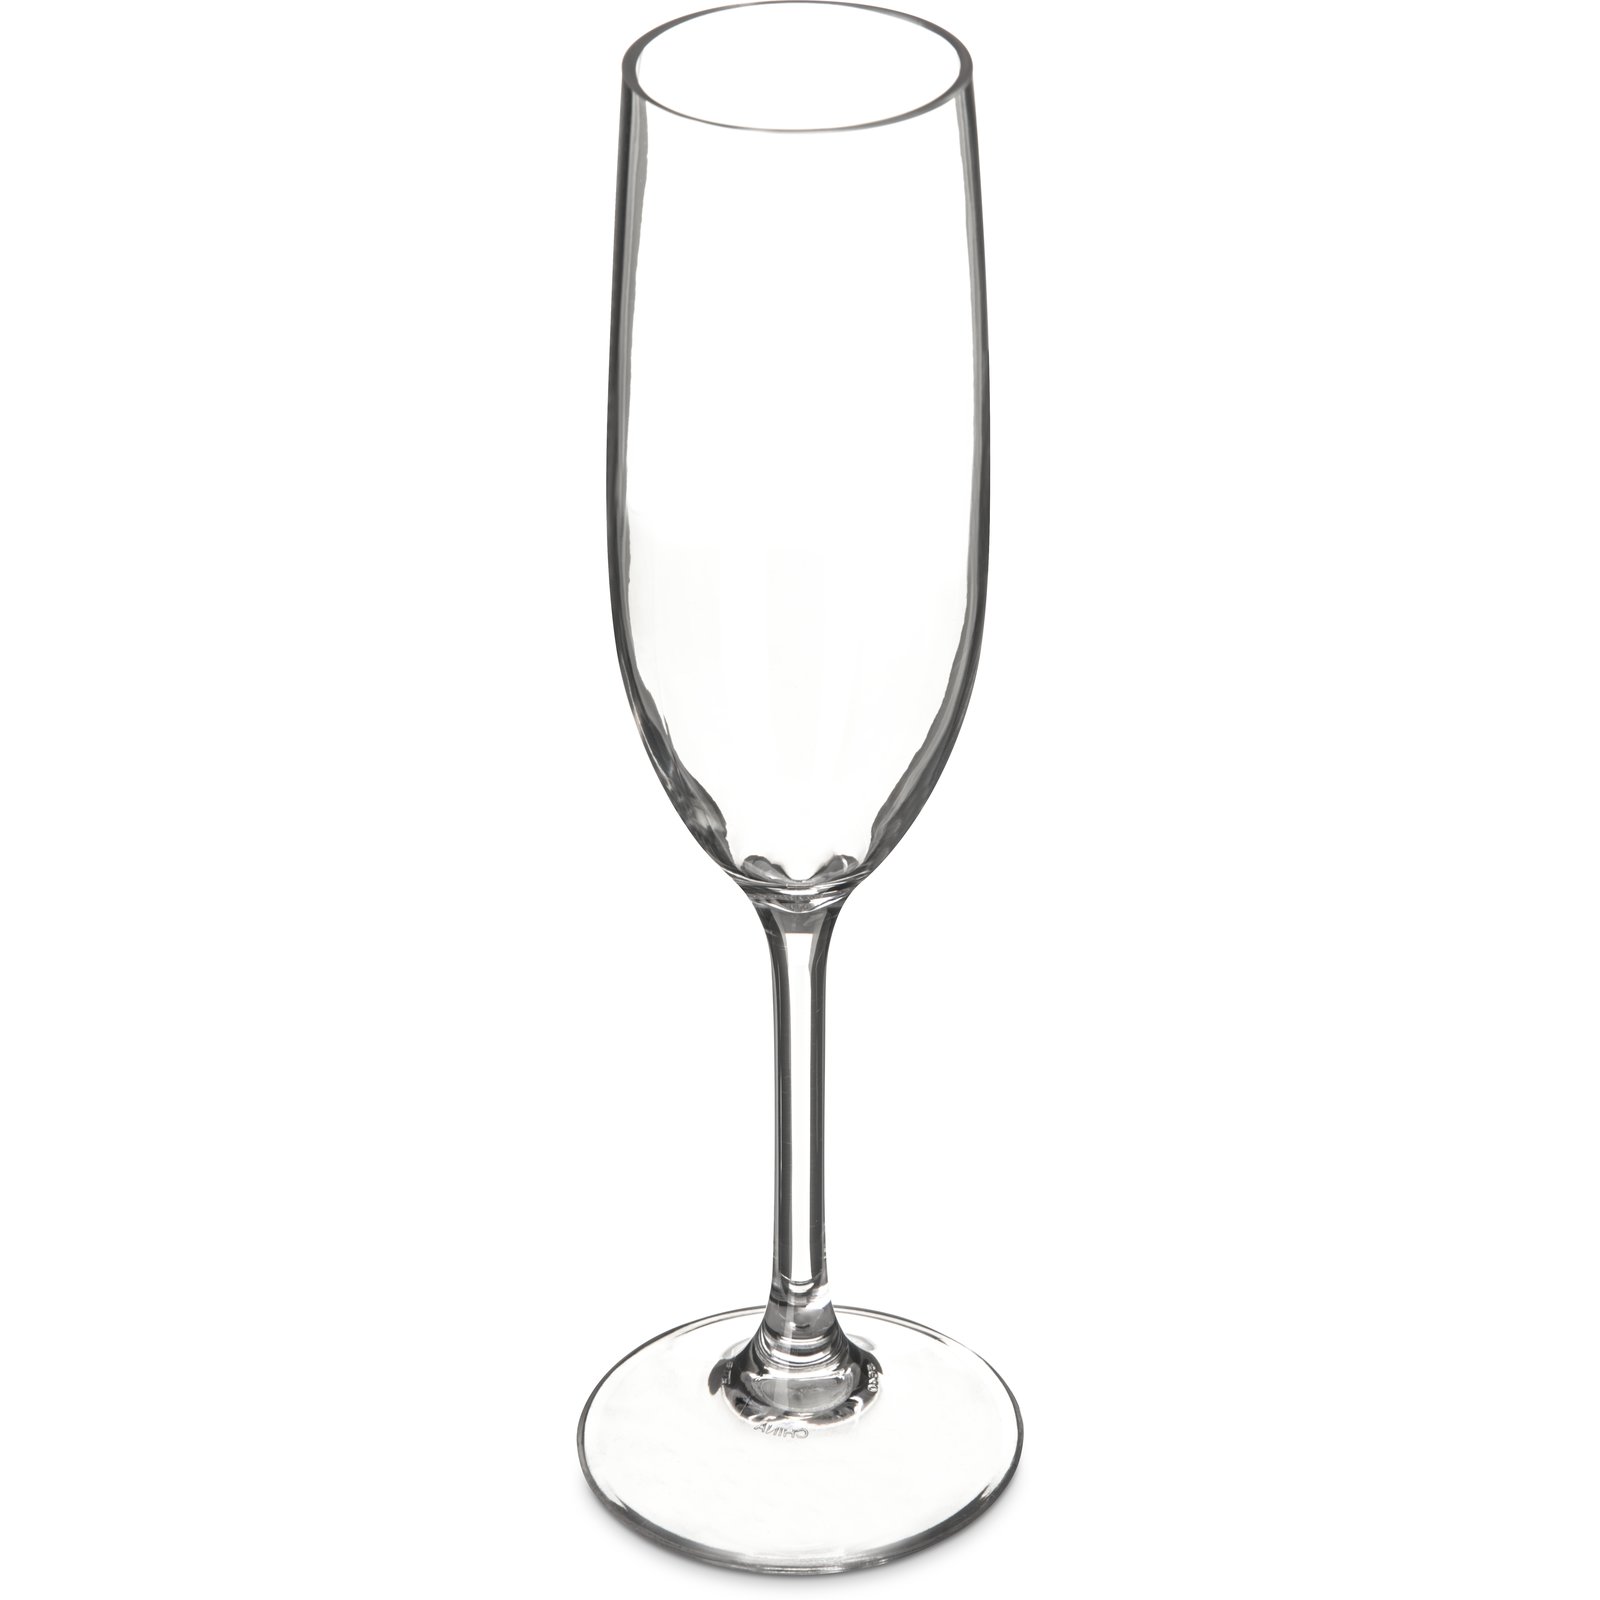 564007 Alibi™ Champagne Flute 8 Oz Clear Carlisle Foodservice Products